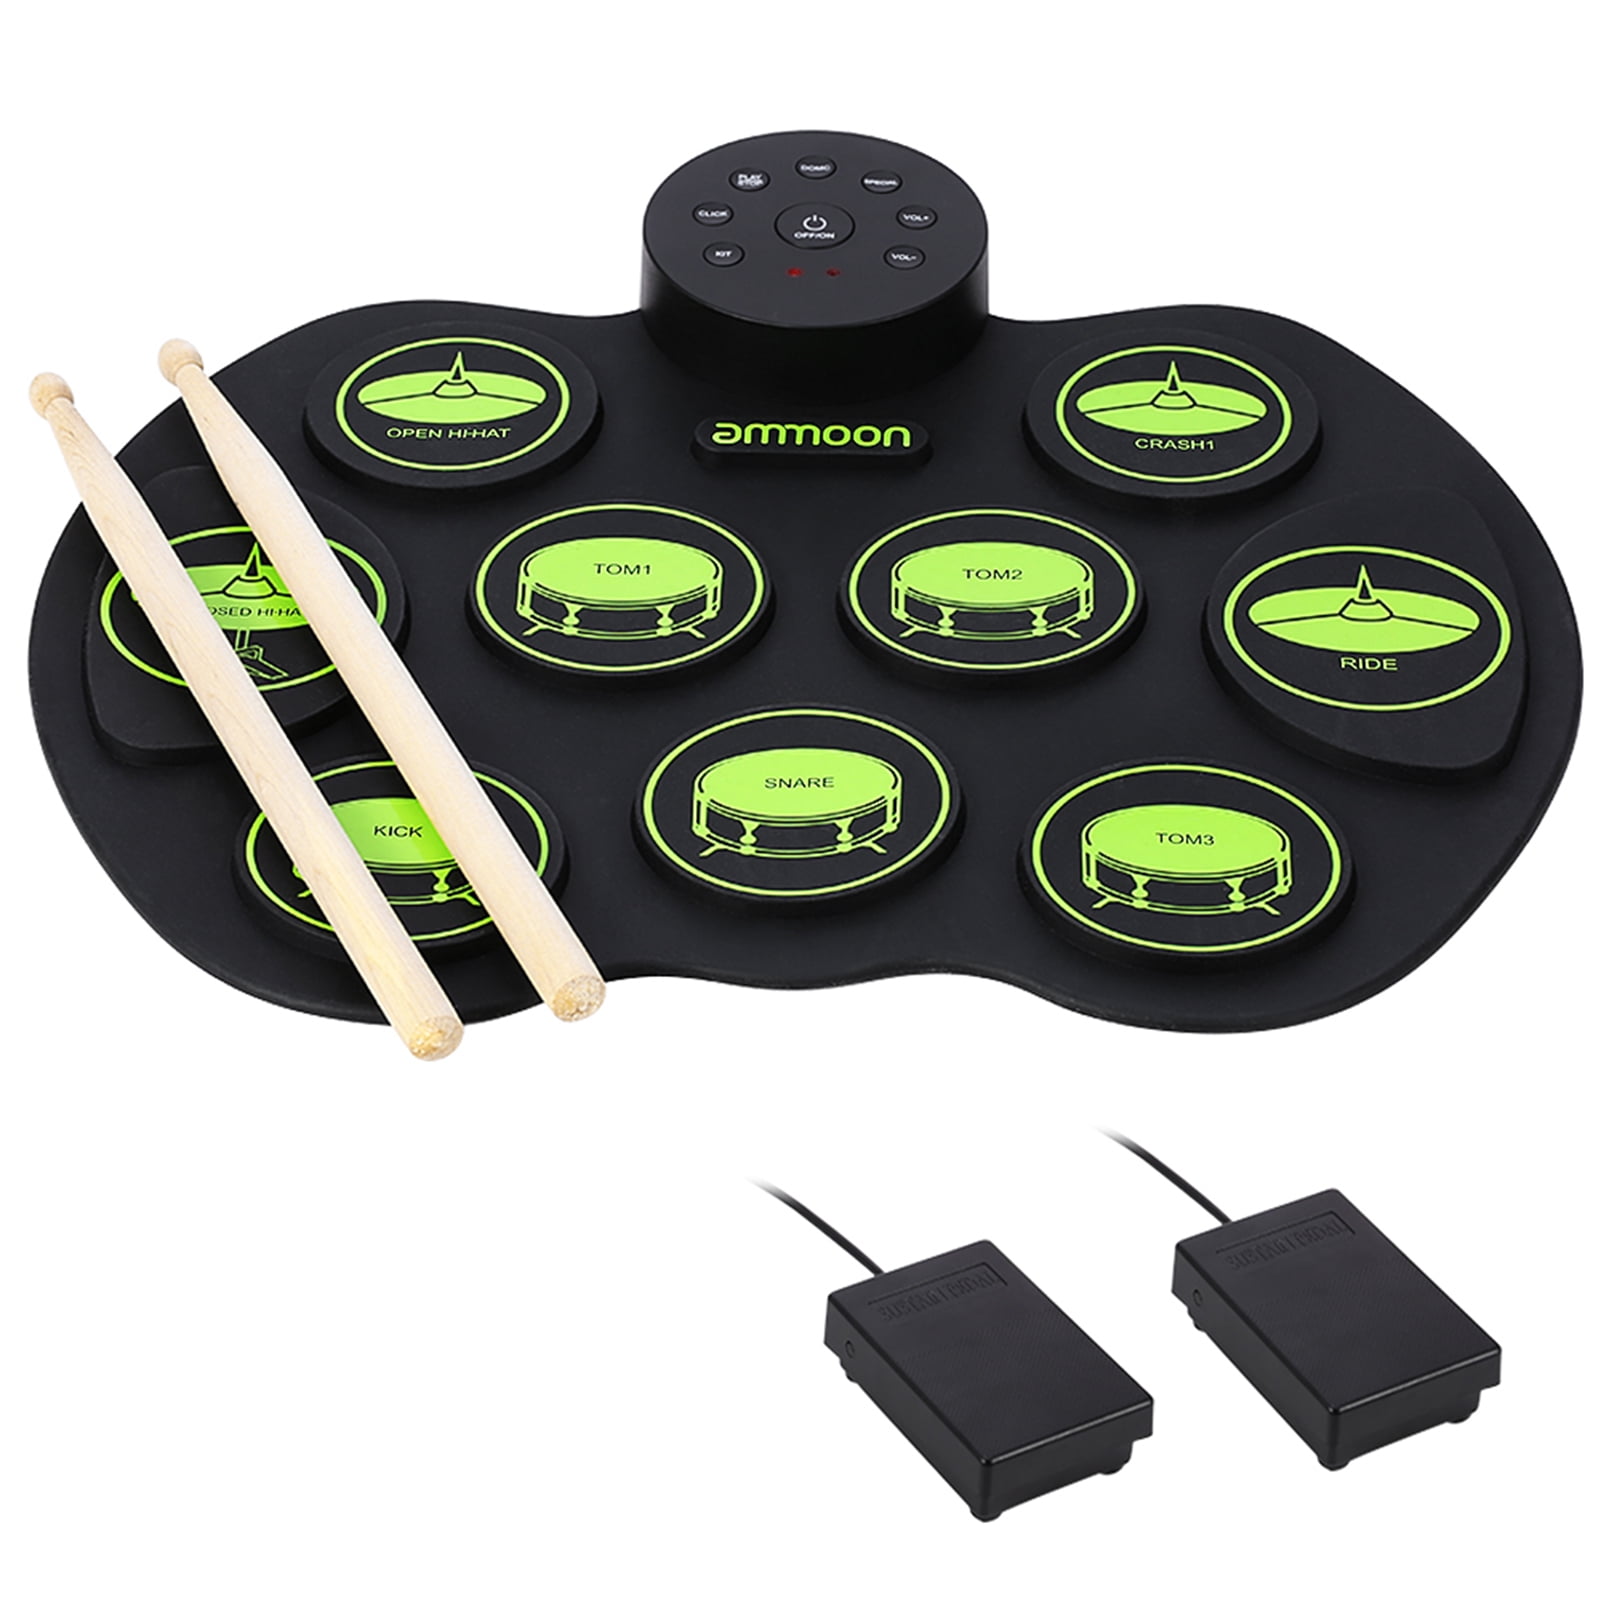 Digital Roll-Up Touch Sensitive Drum Practice Kit No Speakers/AAA Battery Operated 7 Labeled Pads 2 Foot Pedals Kids Children Beginners Green Portable Electronic Drum Pad 